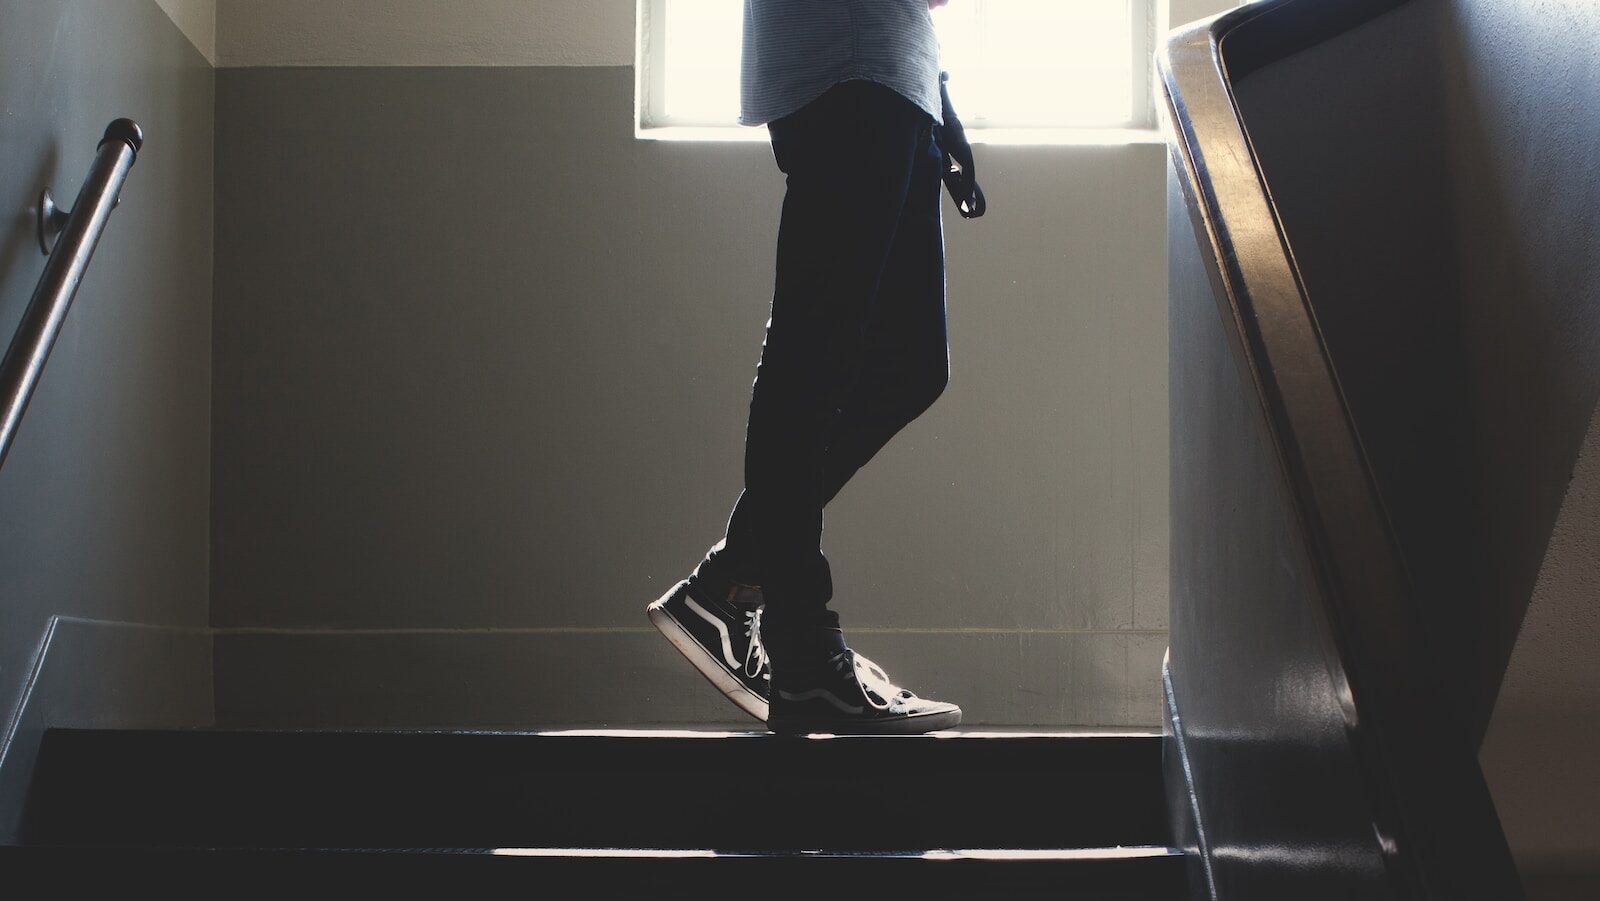 Decorative: EPOG Academy brings AI-empowered coaching to high school students. Image description: person standing on in a dim-lit stair